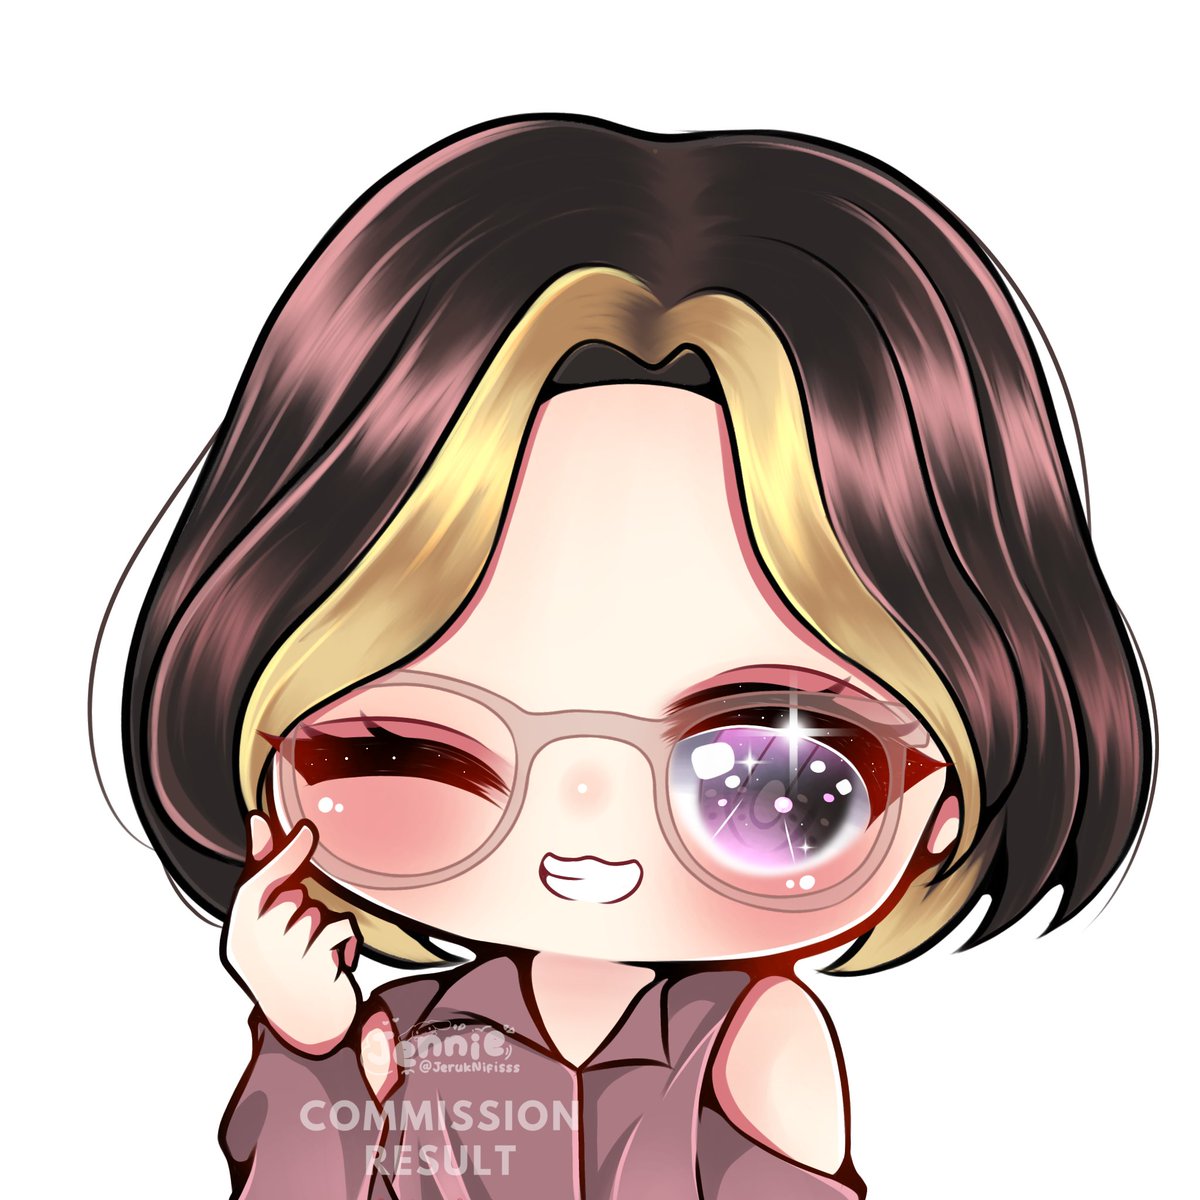 commission result for @/0R4LE thanks for commissioning me! my comission is still open, dm me if you interested 🤍 #commission #commissionsopen #art #Fanarts #zonauangᅠ #zonajajan #commissionart #chibi #chibiart